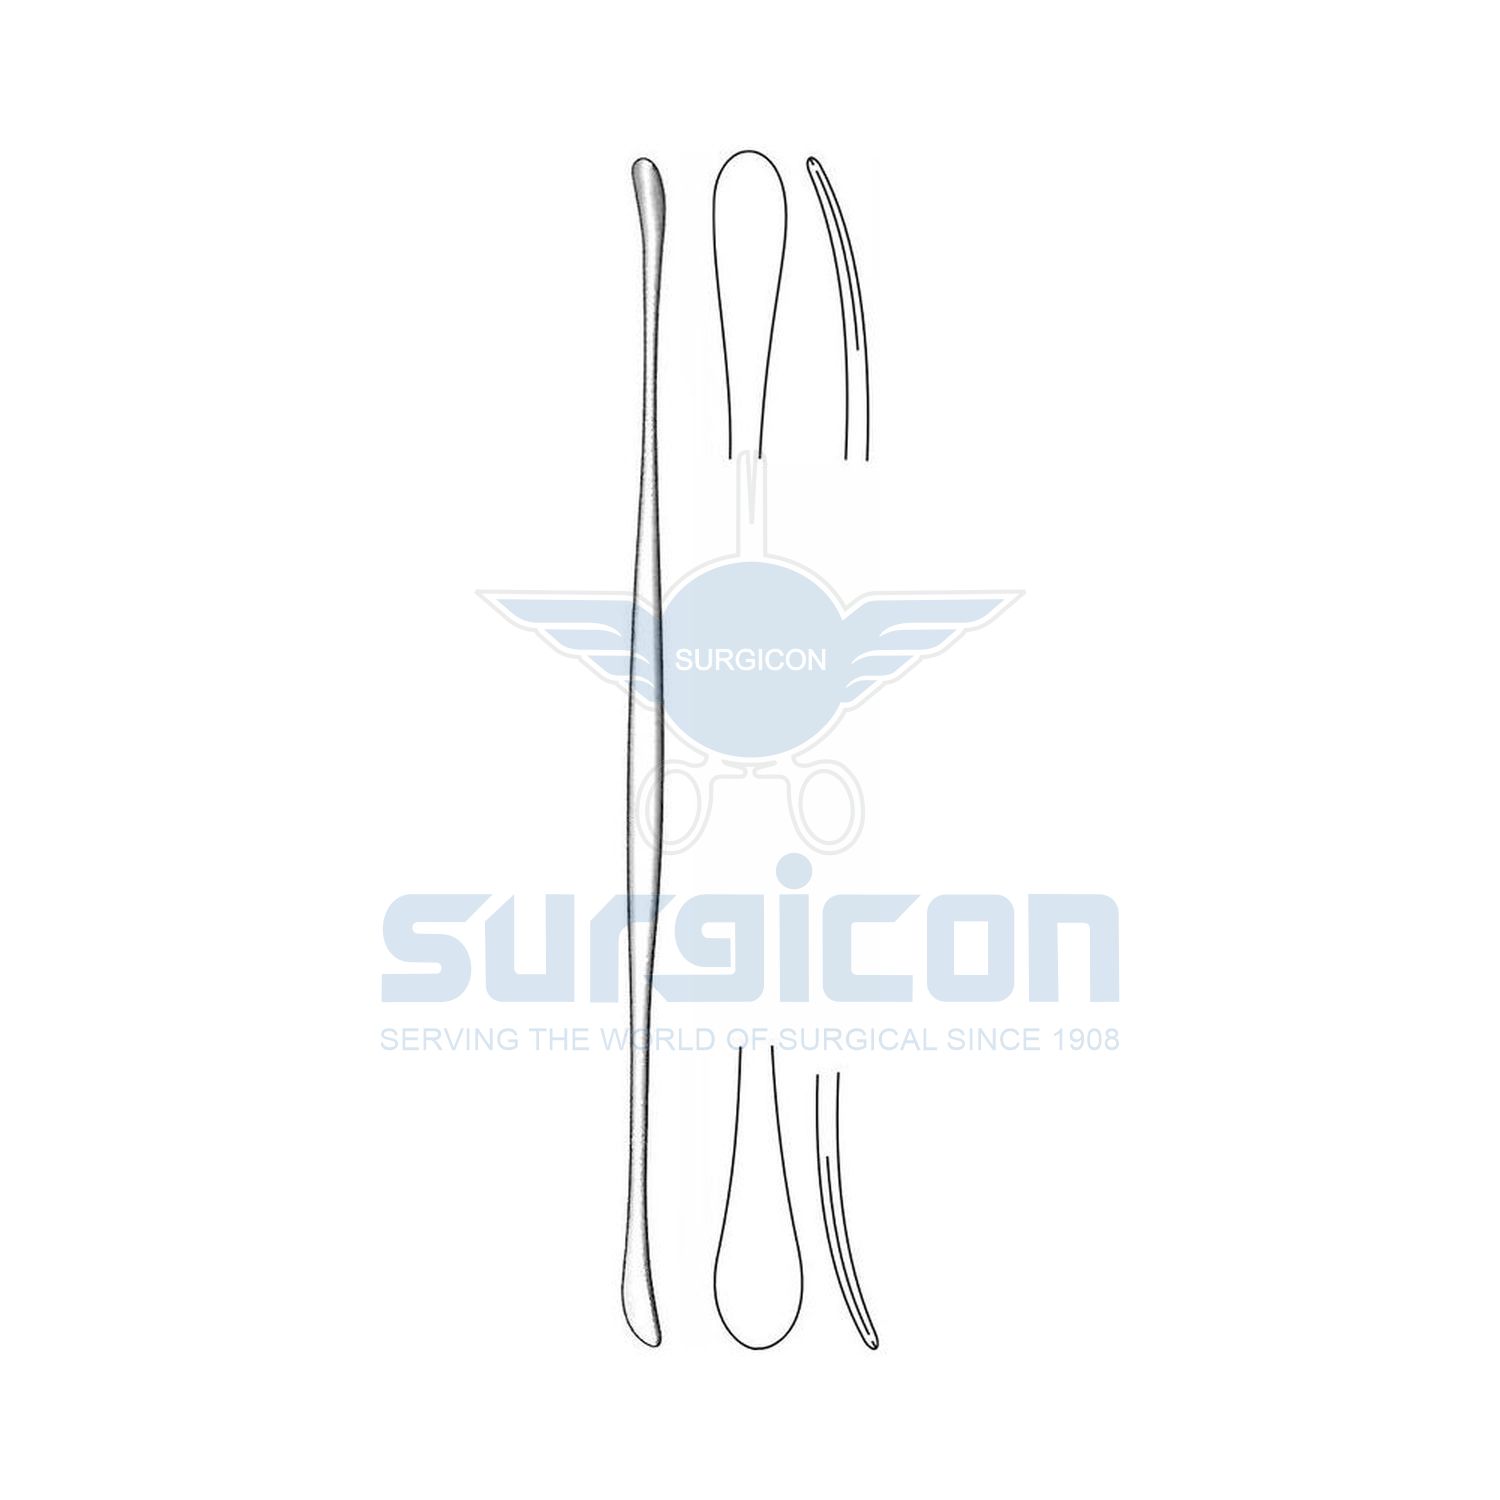 Penfield-Dissector-J-25-401